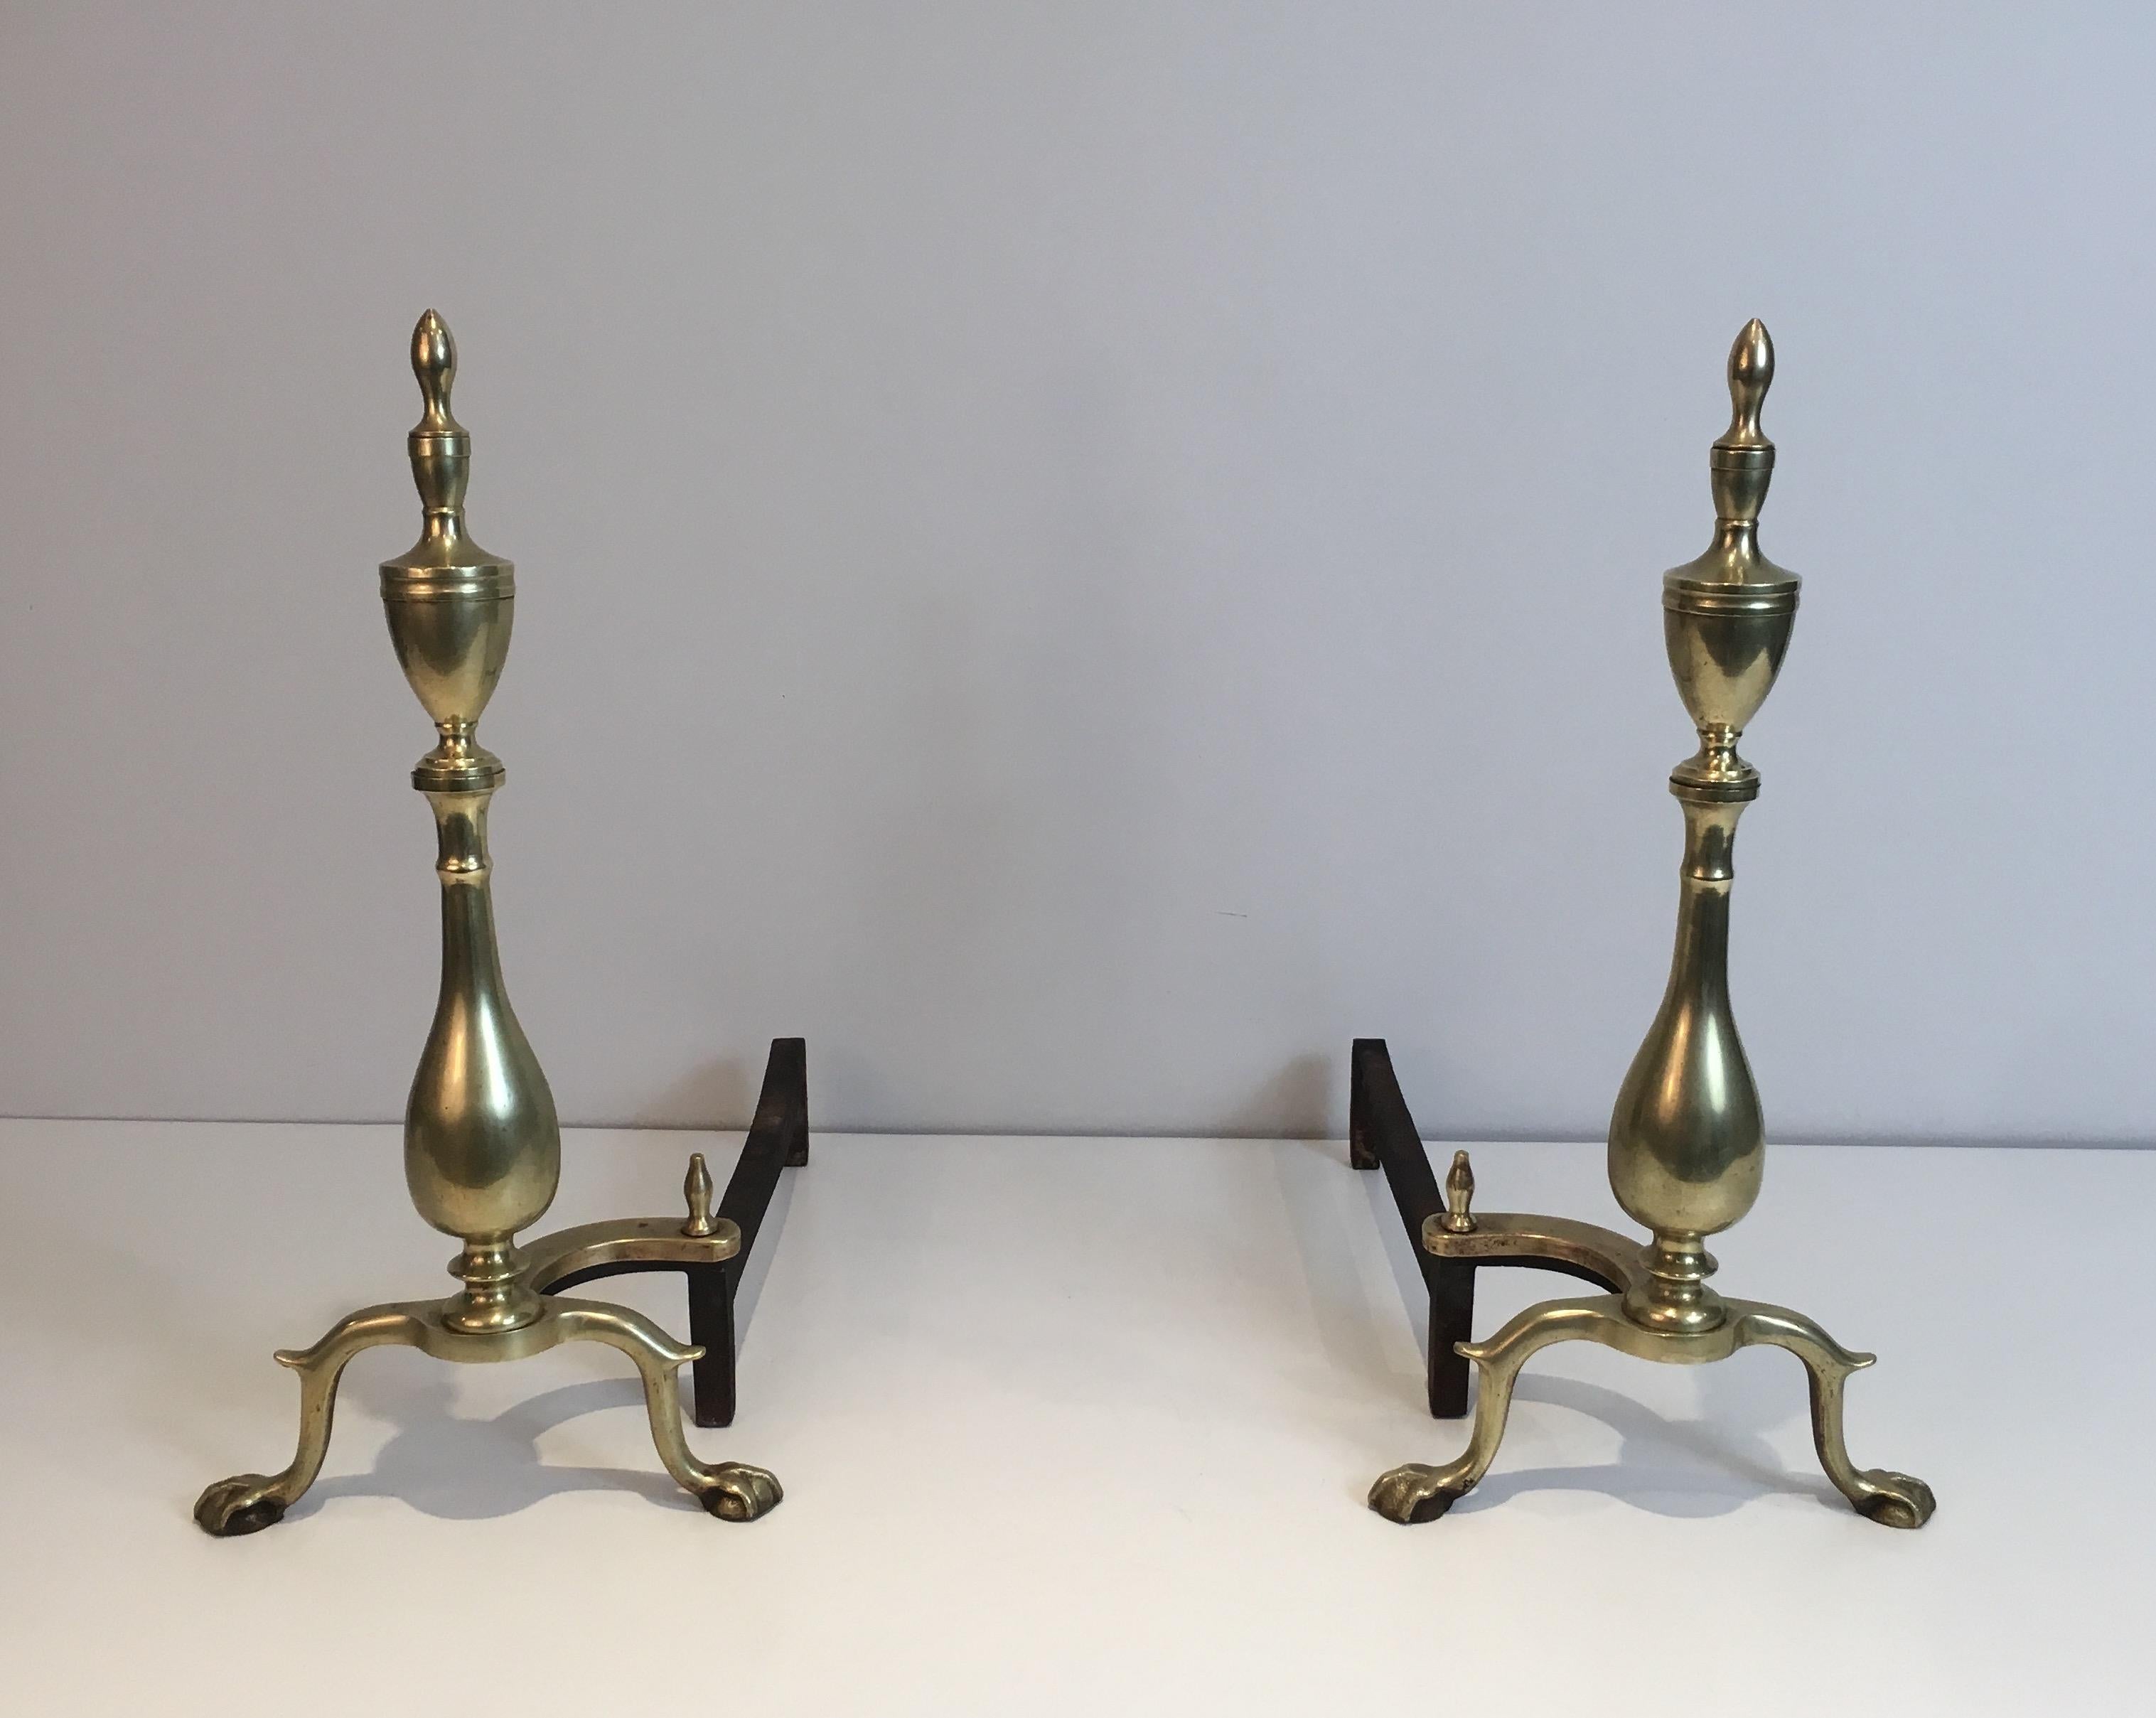 Neoclassical Pair of Neo-Gothic Bronze and Wrought Iron Andirons, French, 19th Century For Sale